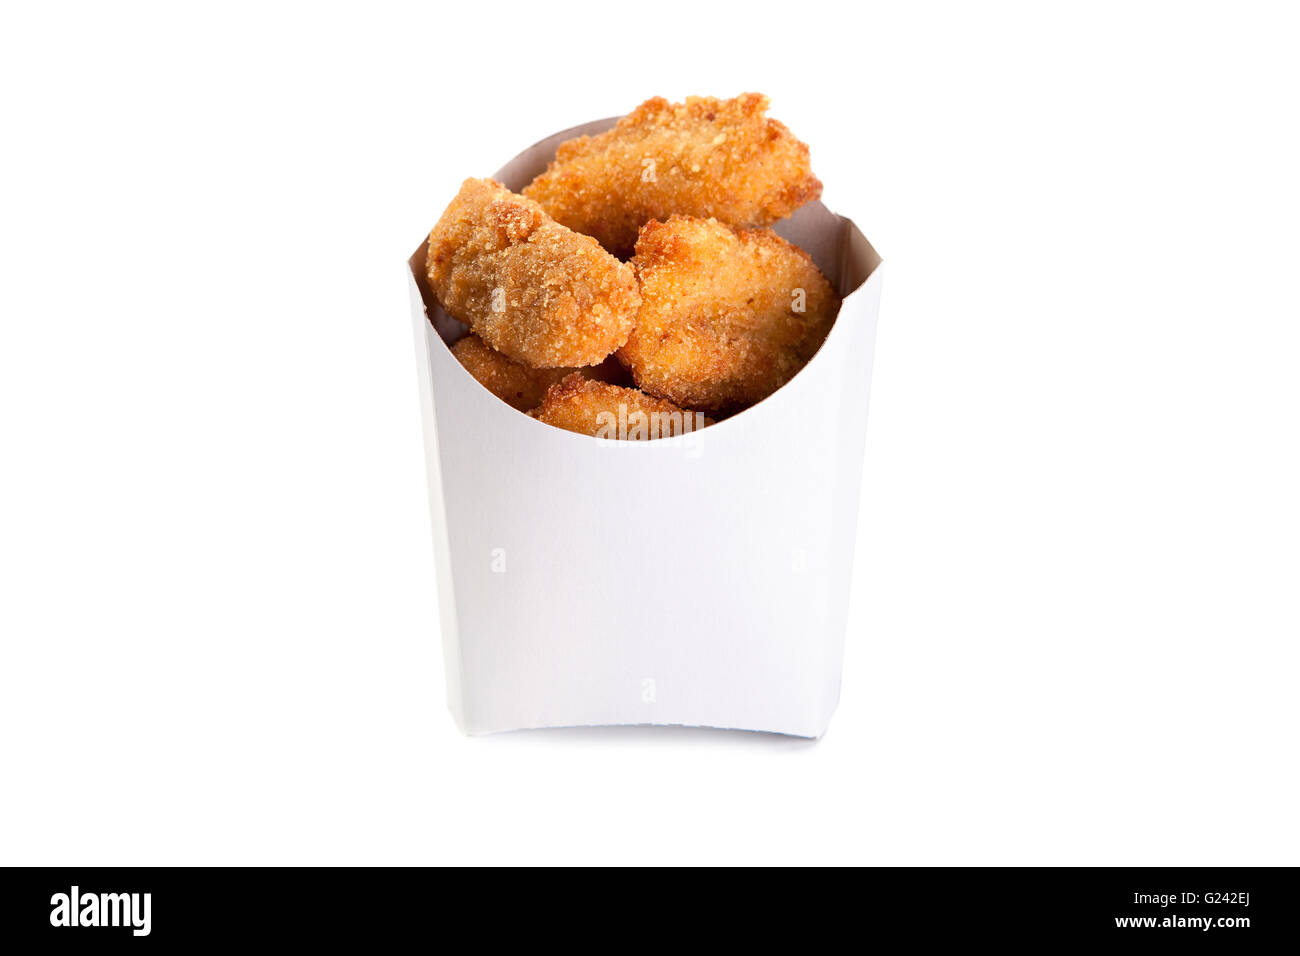 Fried chicken nuggets in a white box isolated Stock Photo